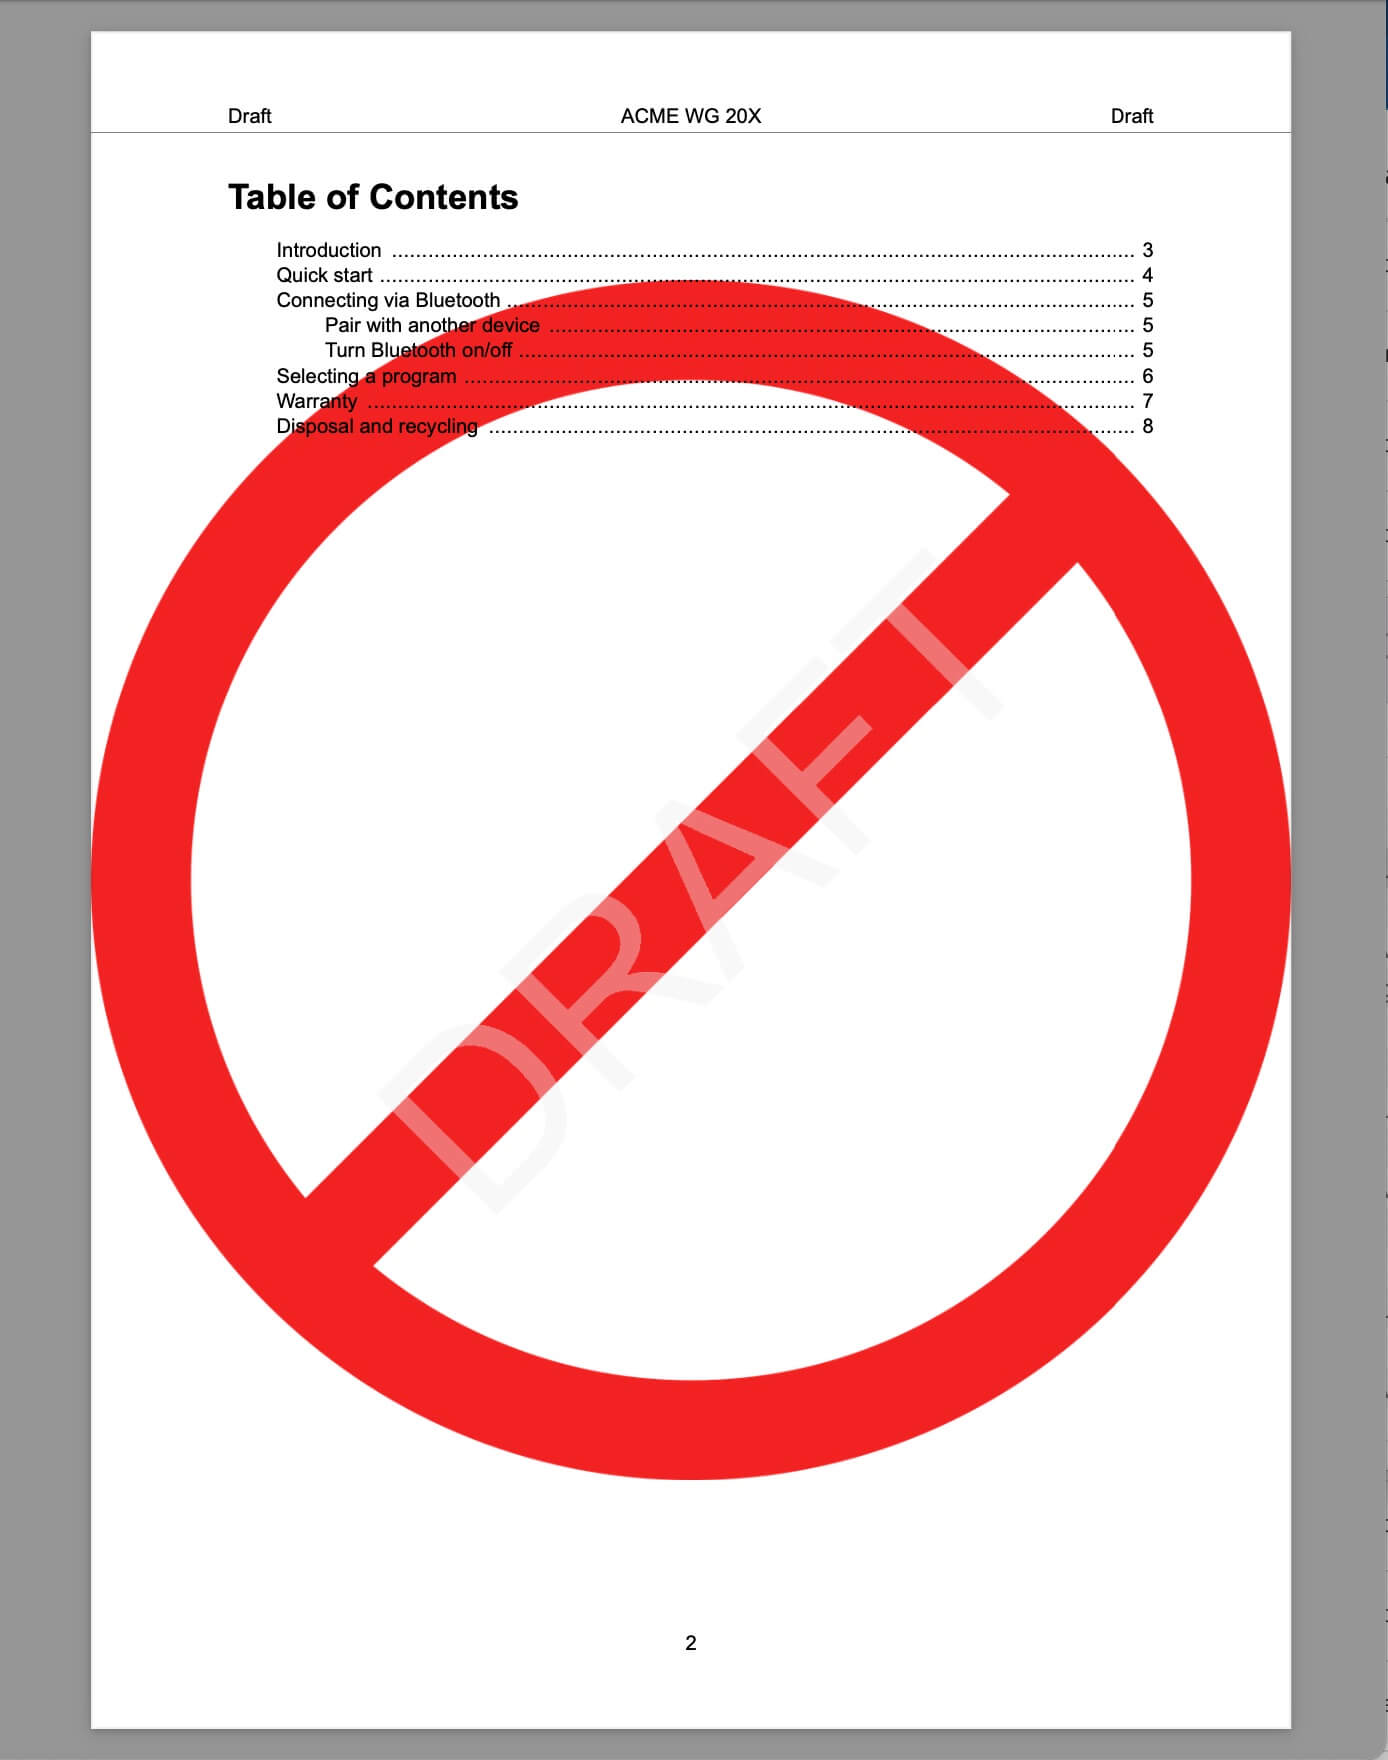 Table of contents page in a PDF. It has a red stop sign behind the text and the word draft written diagonally as a watermark.